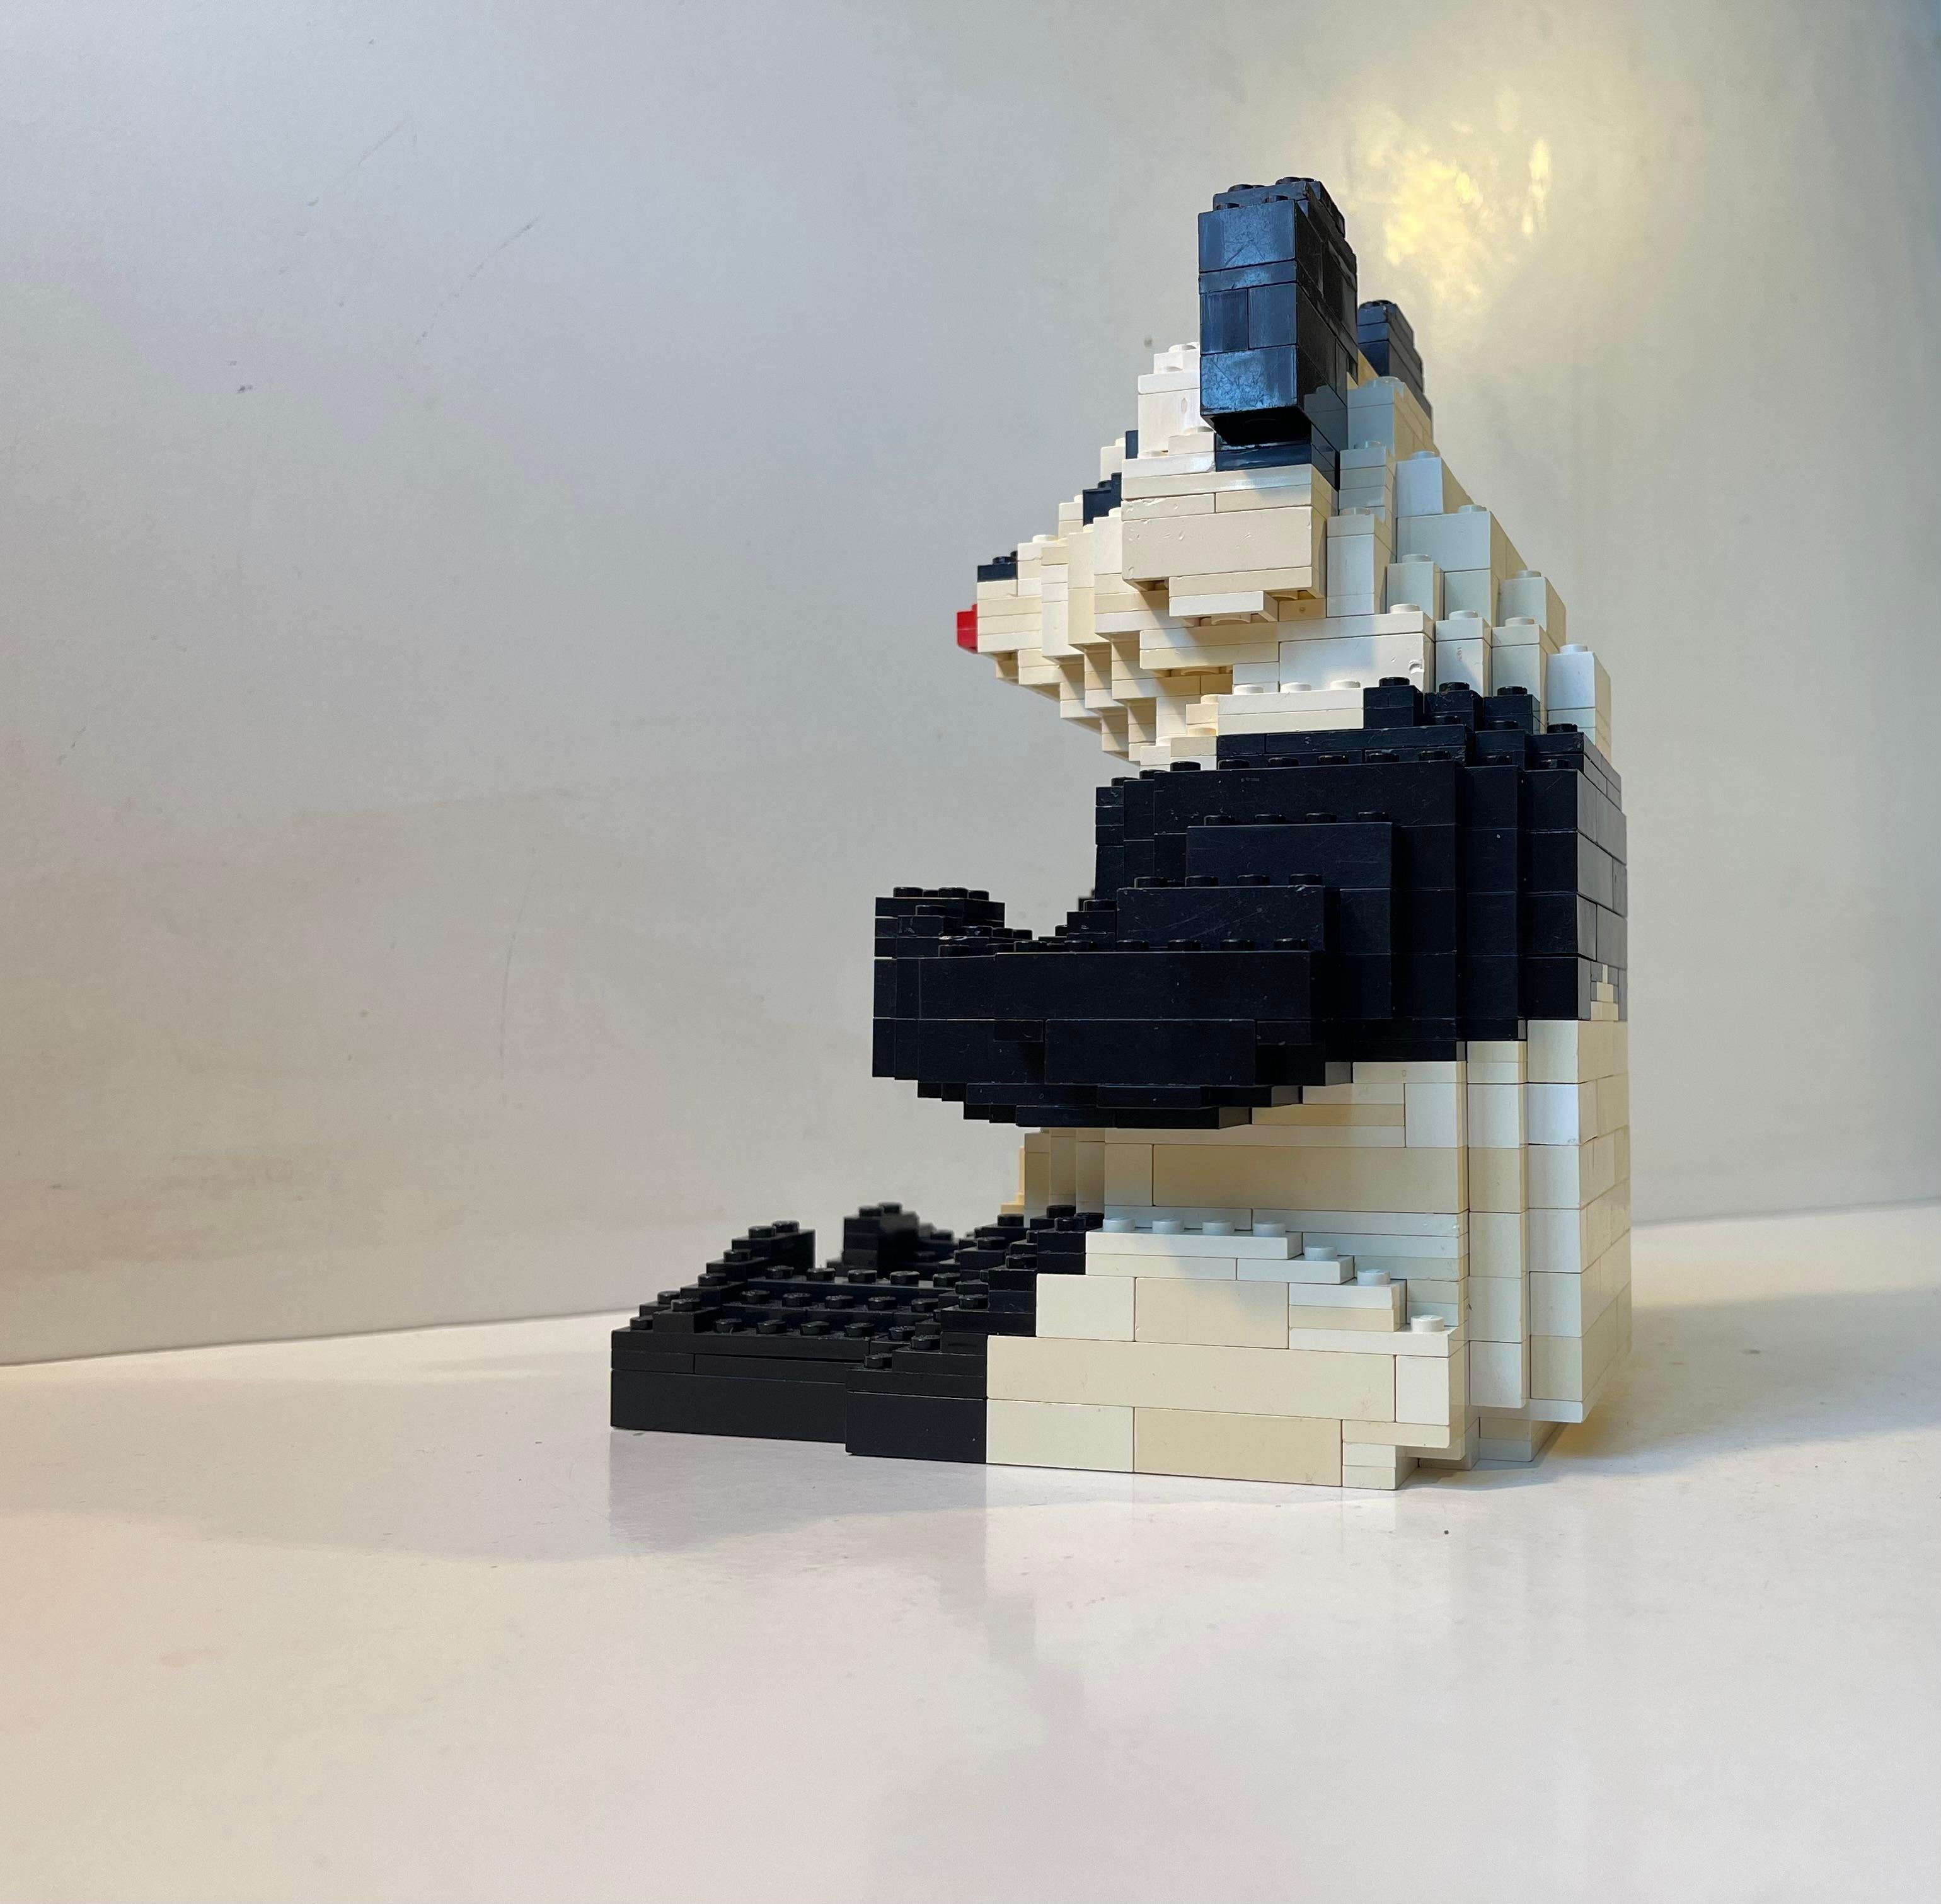 Large Panda figurine made from Lego blocks. It served as a toy store Zoo-line advertising display during the early 1990s. It has a great graphical and pixelated look. A physical counterpart to digitalt art. Measurements: H: 22 cm, W: 15 cm, Dept: 16